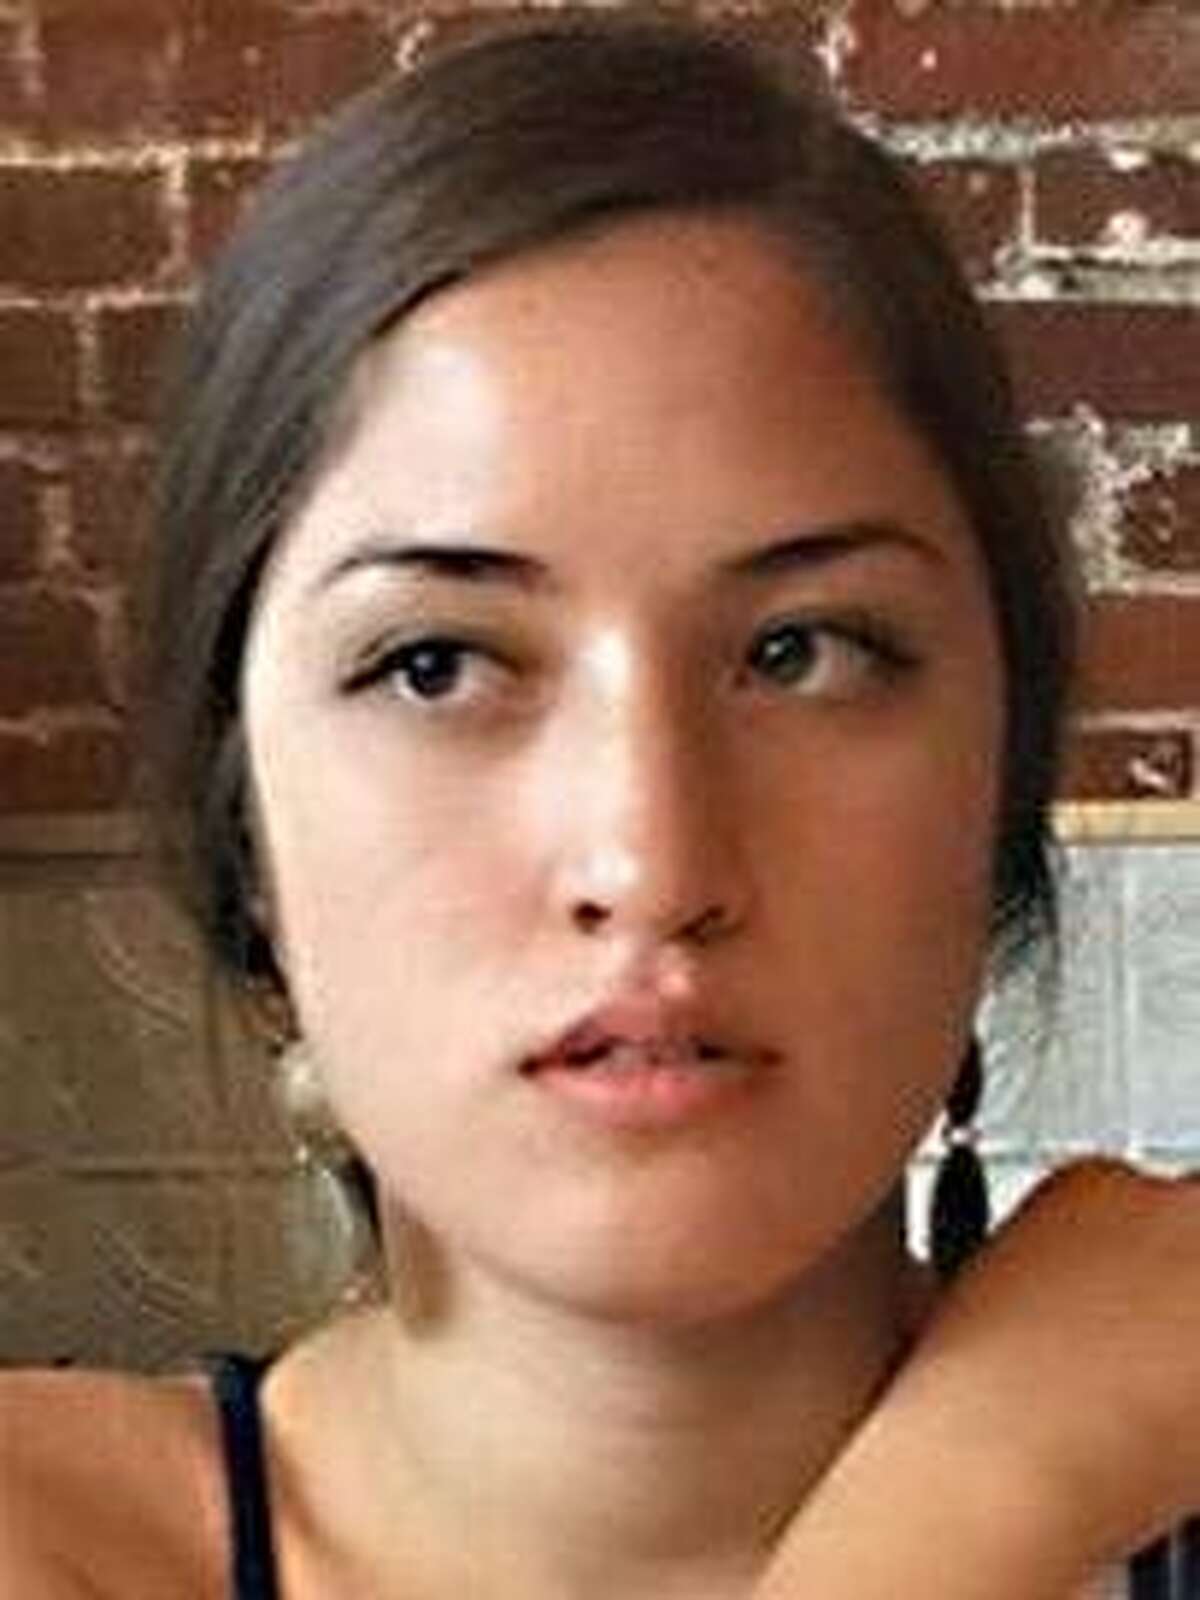 Jennifer Morris, a UC Berkeley student, was identified as one of the victims of a fire in an Oakland warehouse on Dec. 2, 2016. Courtesy: UC Berkeley